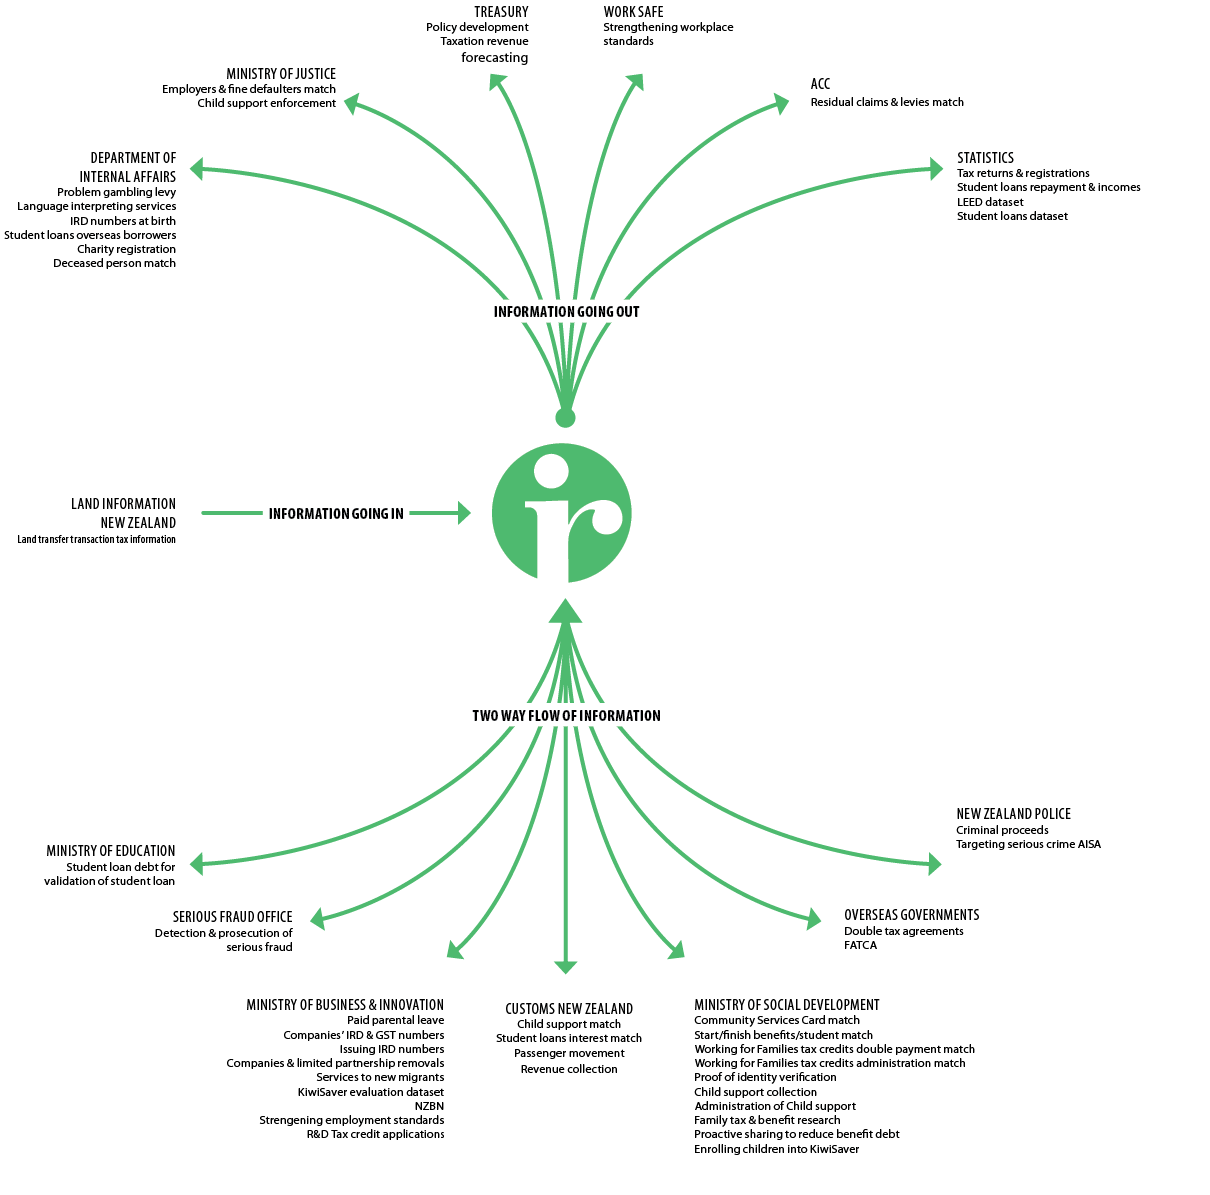 Diagram of information flows between Inland revenue and other organisations - see the table for details.